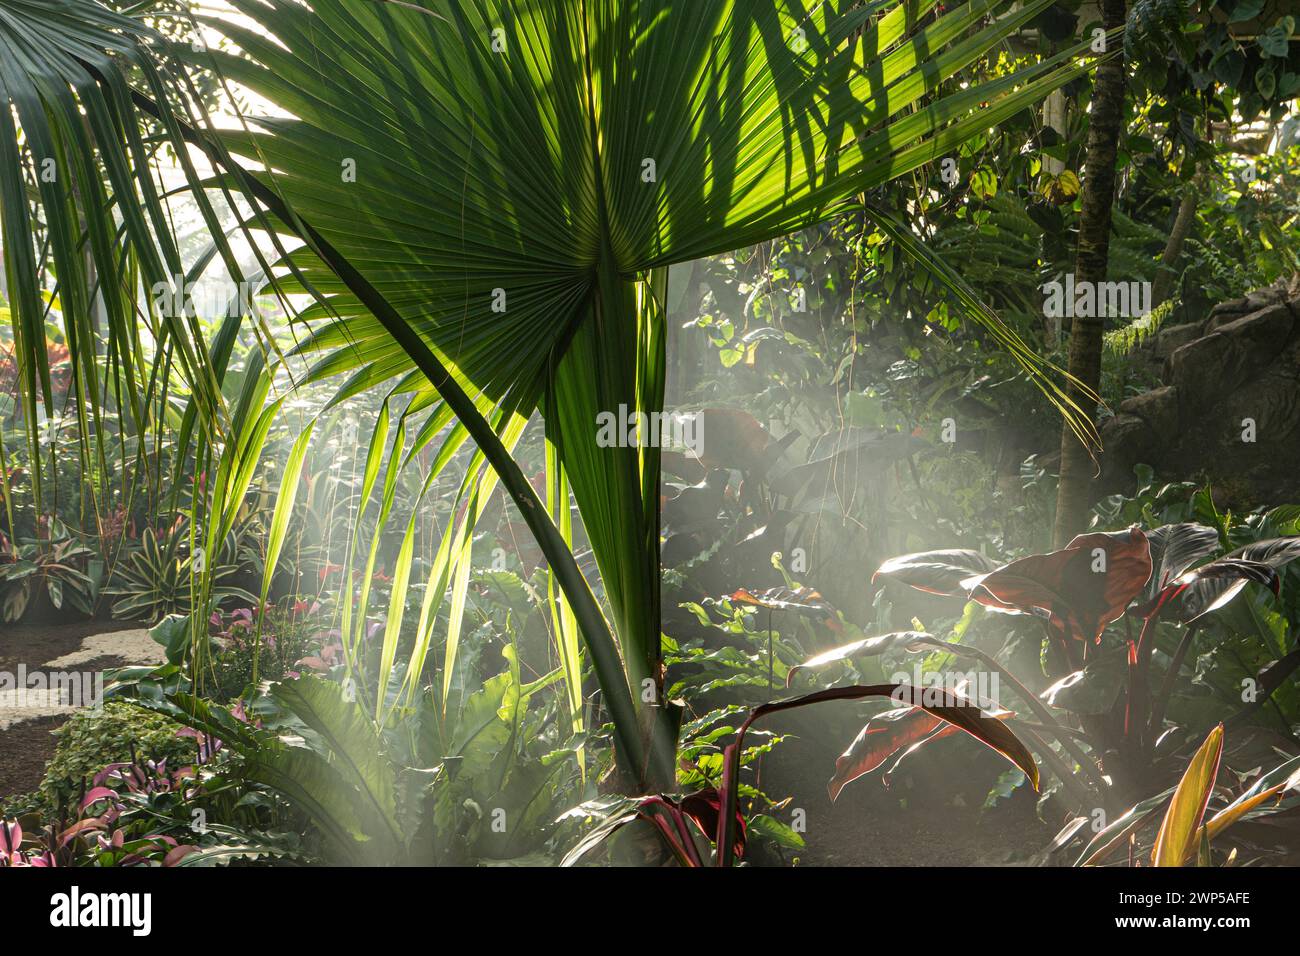 Philodendron Imperial Red plant leaves in foreground, with exotic palm Trachycarpus fortunei behind, in hot tropical environment climate with shafts of light backlighting through the morning mist. Stock Photo